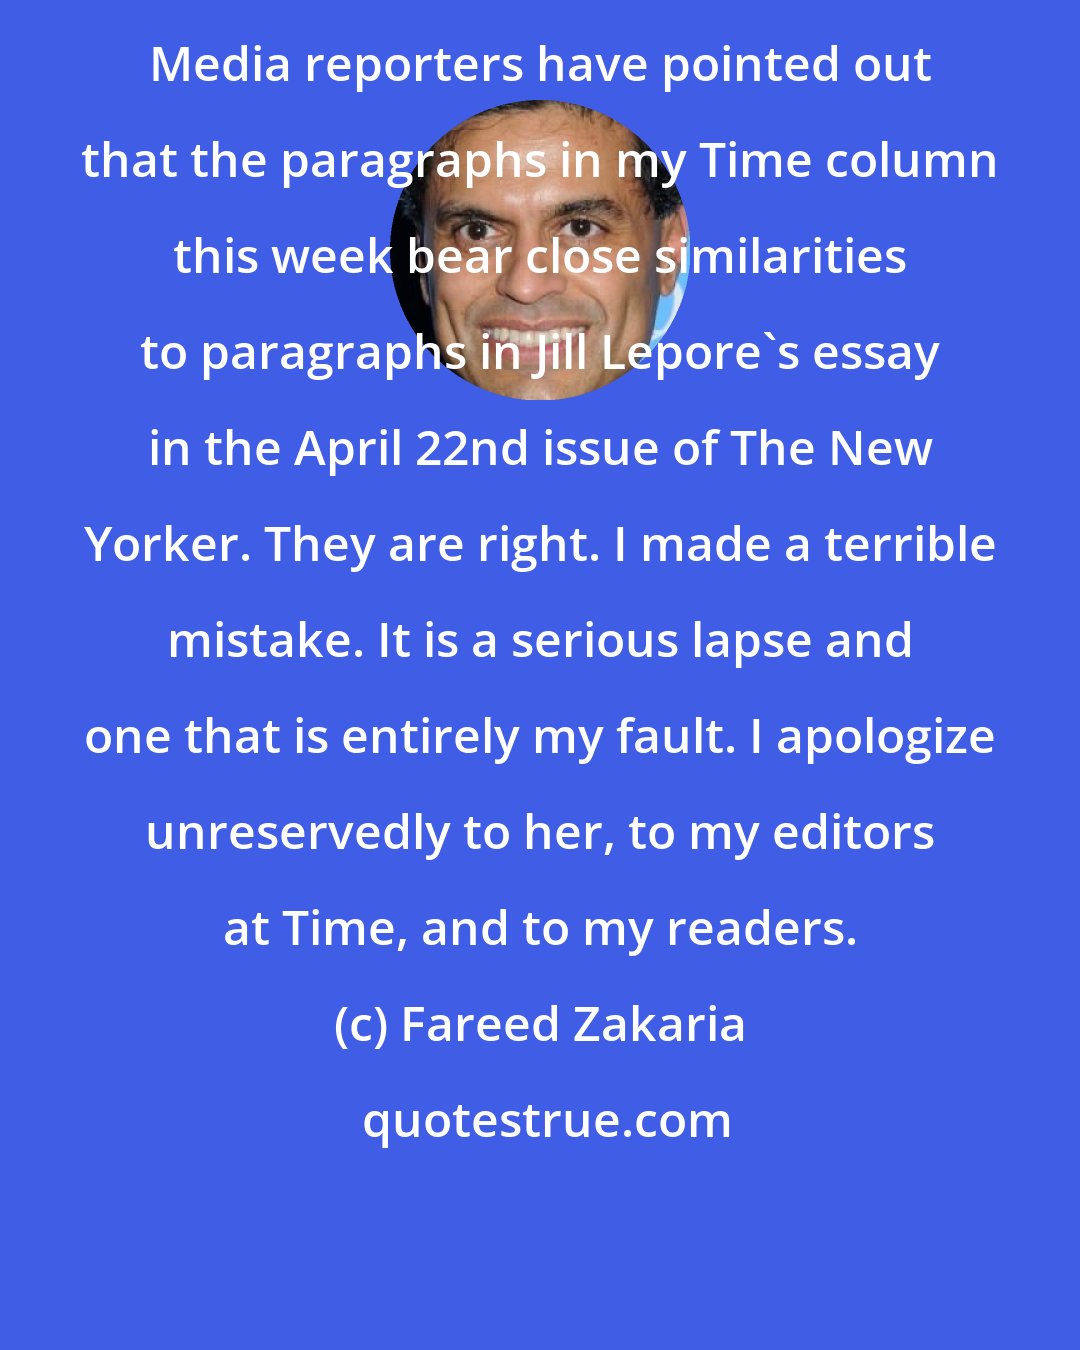 Fareed Zakaria: Media reporters have pointed out that the paragraphs in my Time column this week bear close similarities to paragraphs in Jill Lepore's essay in the April 22nd issue of The New Yorker. They are right. I made a terrible mistake. It is a serious lapse and one that is entirely my fault. I apologize unreservedly to her, to my editors at Time, and to my readers.